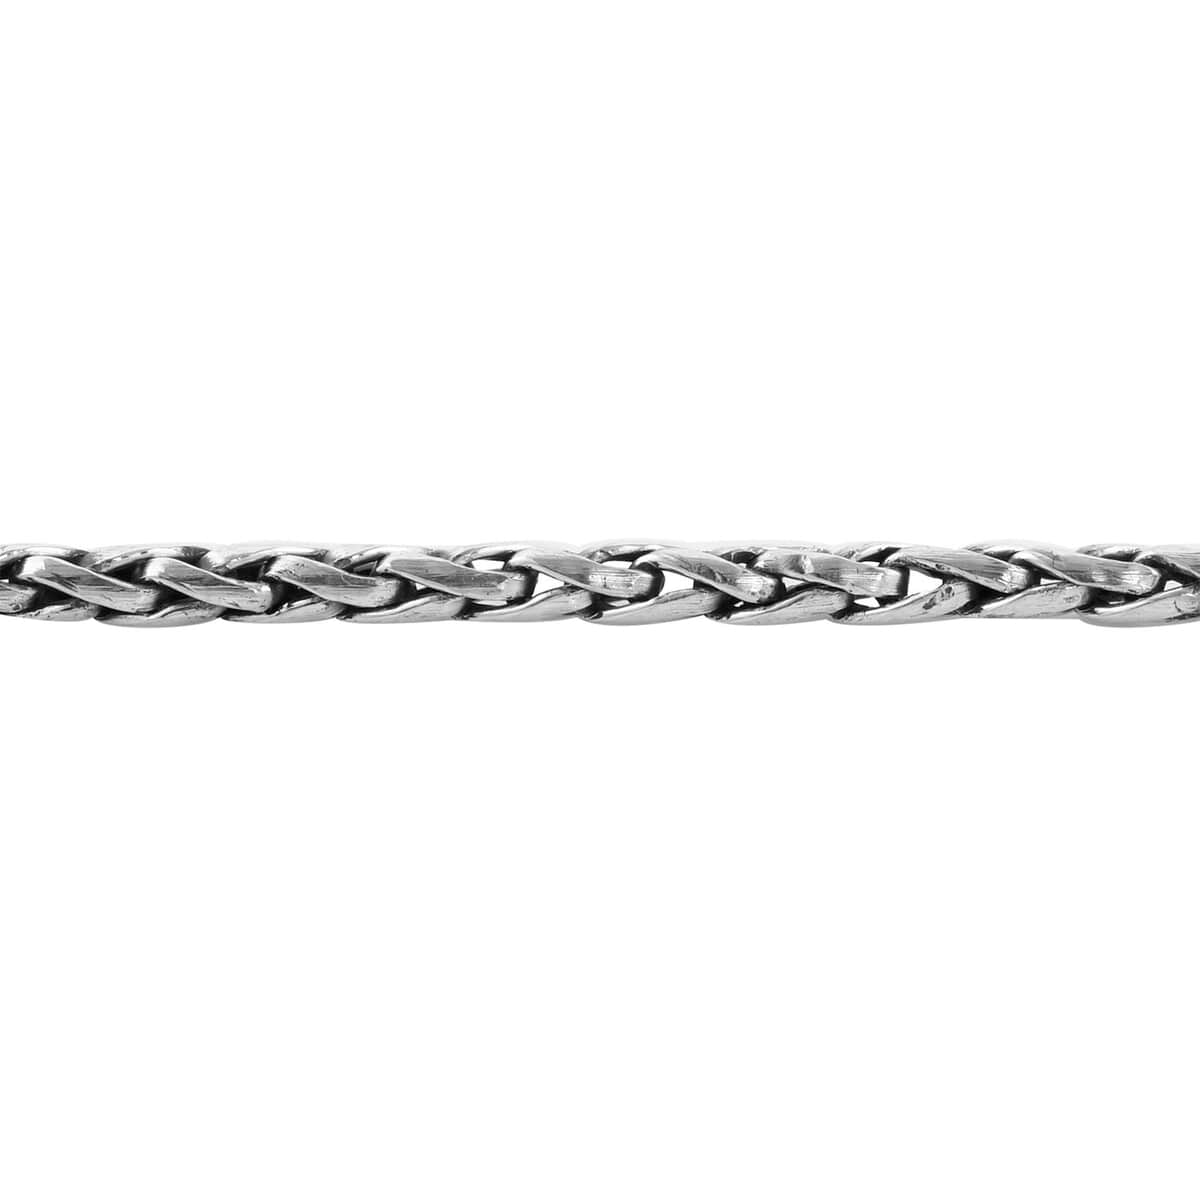 Bali Legacy Padian Chain Necklace, Silver Padian Necklace, Sterling Silver Chain Necklace, 22 Inch Necklace 19.9 Grams image number 5